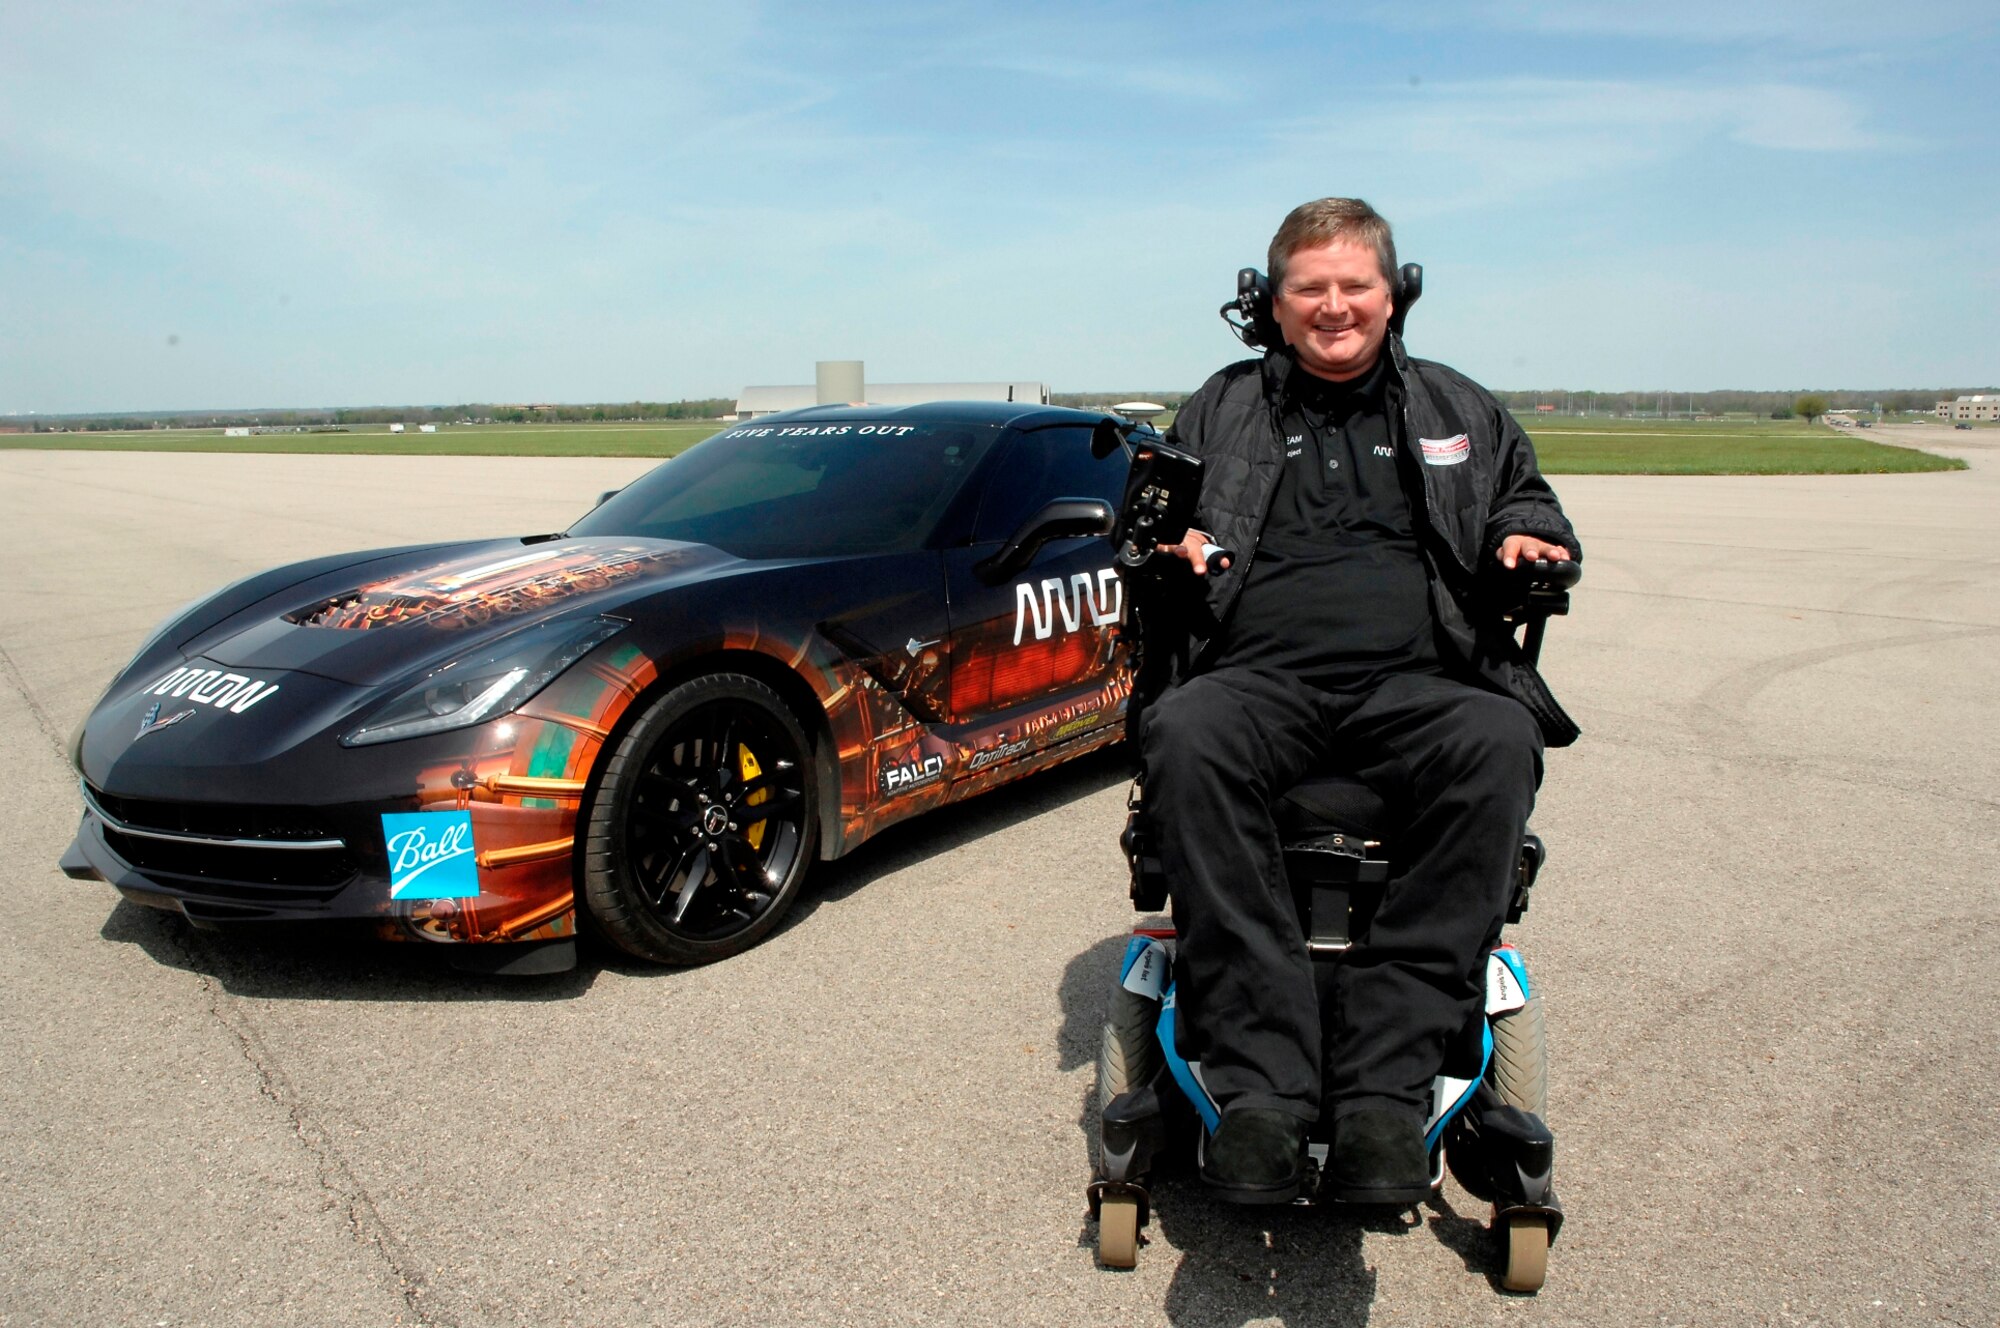 Sam Schmidt, former Indi Race Car driver is stationed in front of a Semi-Autonomous Motorcar know as SAM which he drove 84 mpr on the runway next to the National Museum of the United States Air Force during a demonstration to showcase new human performance technologies on May 6. (USAF photo by Al Bright)